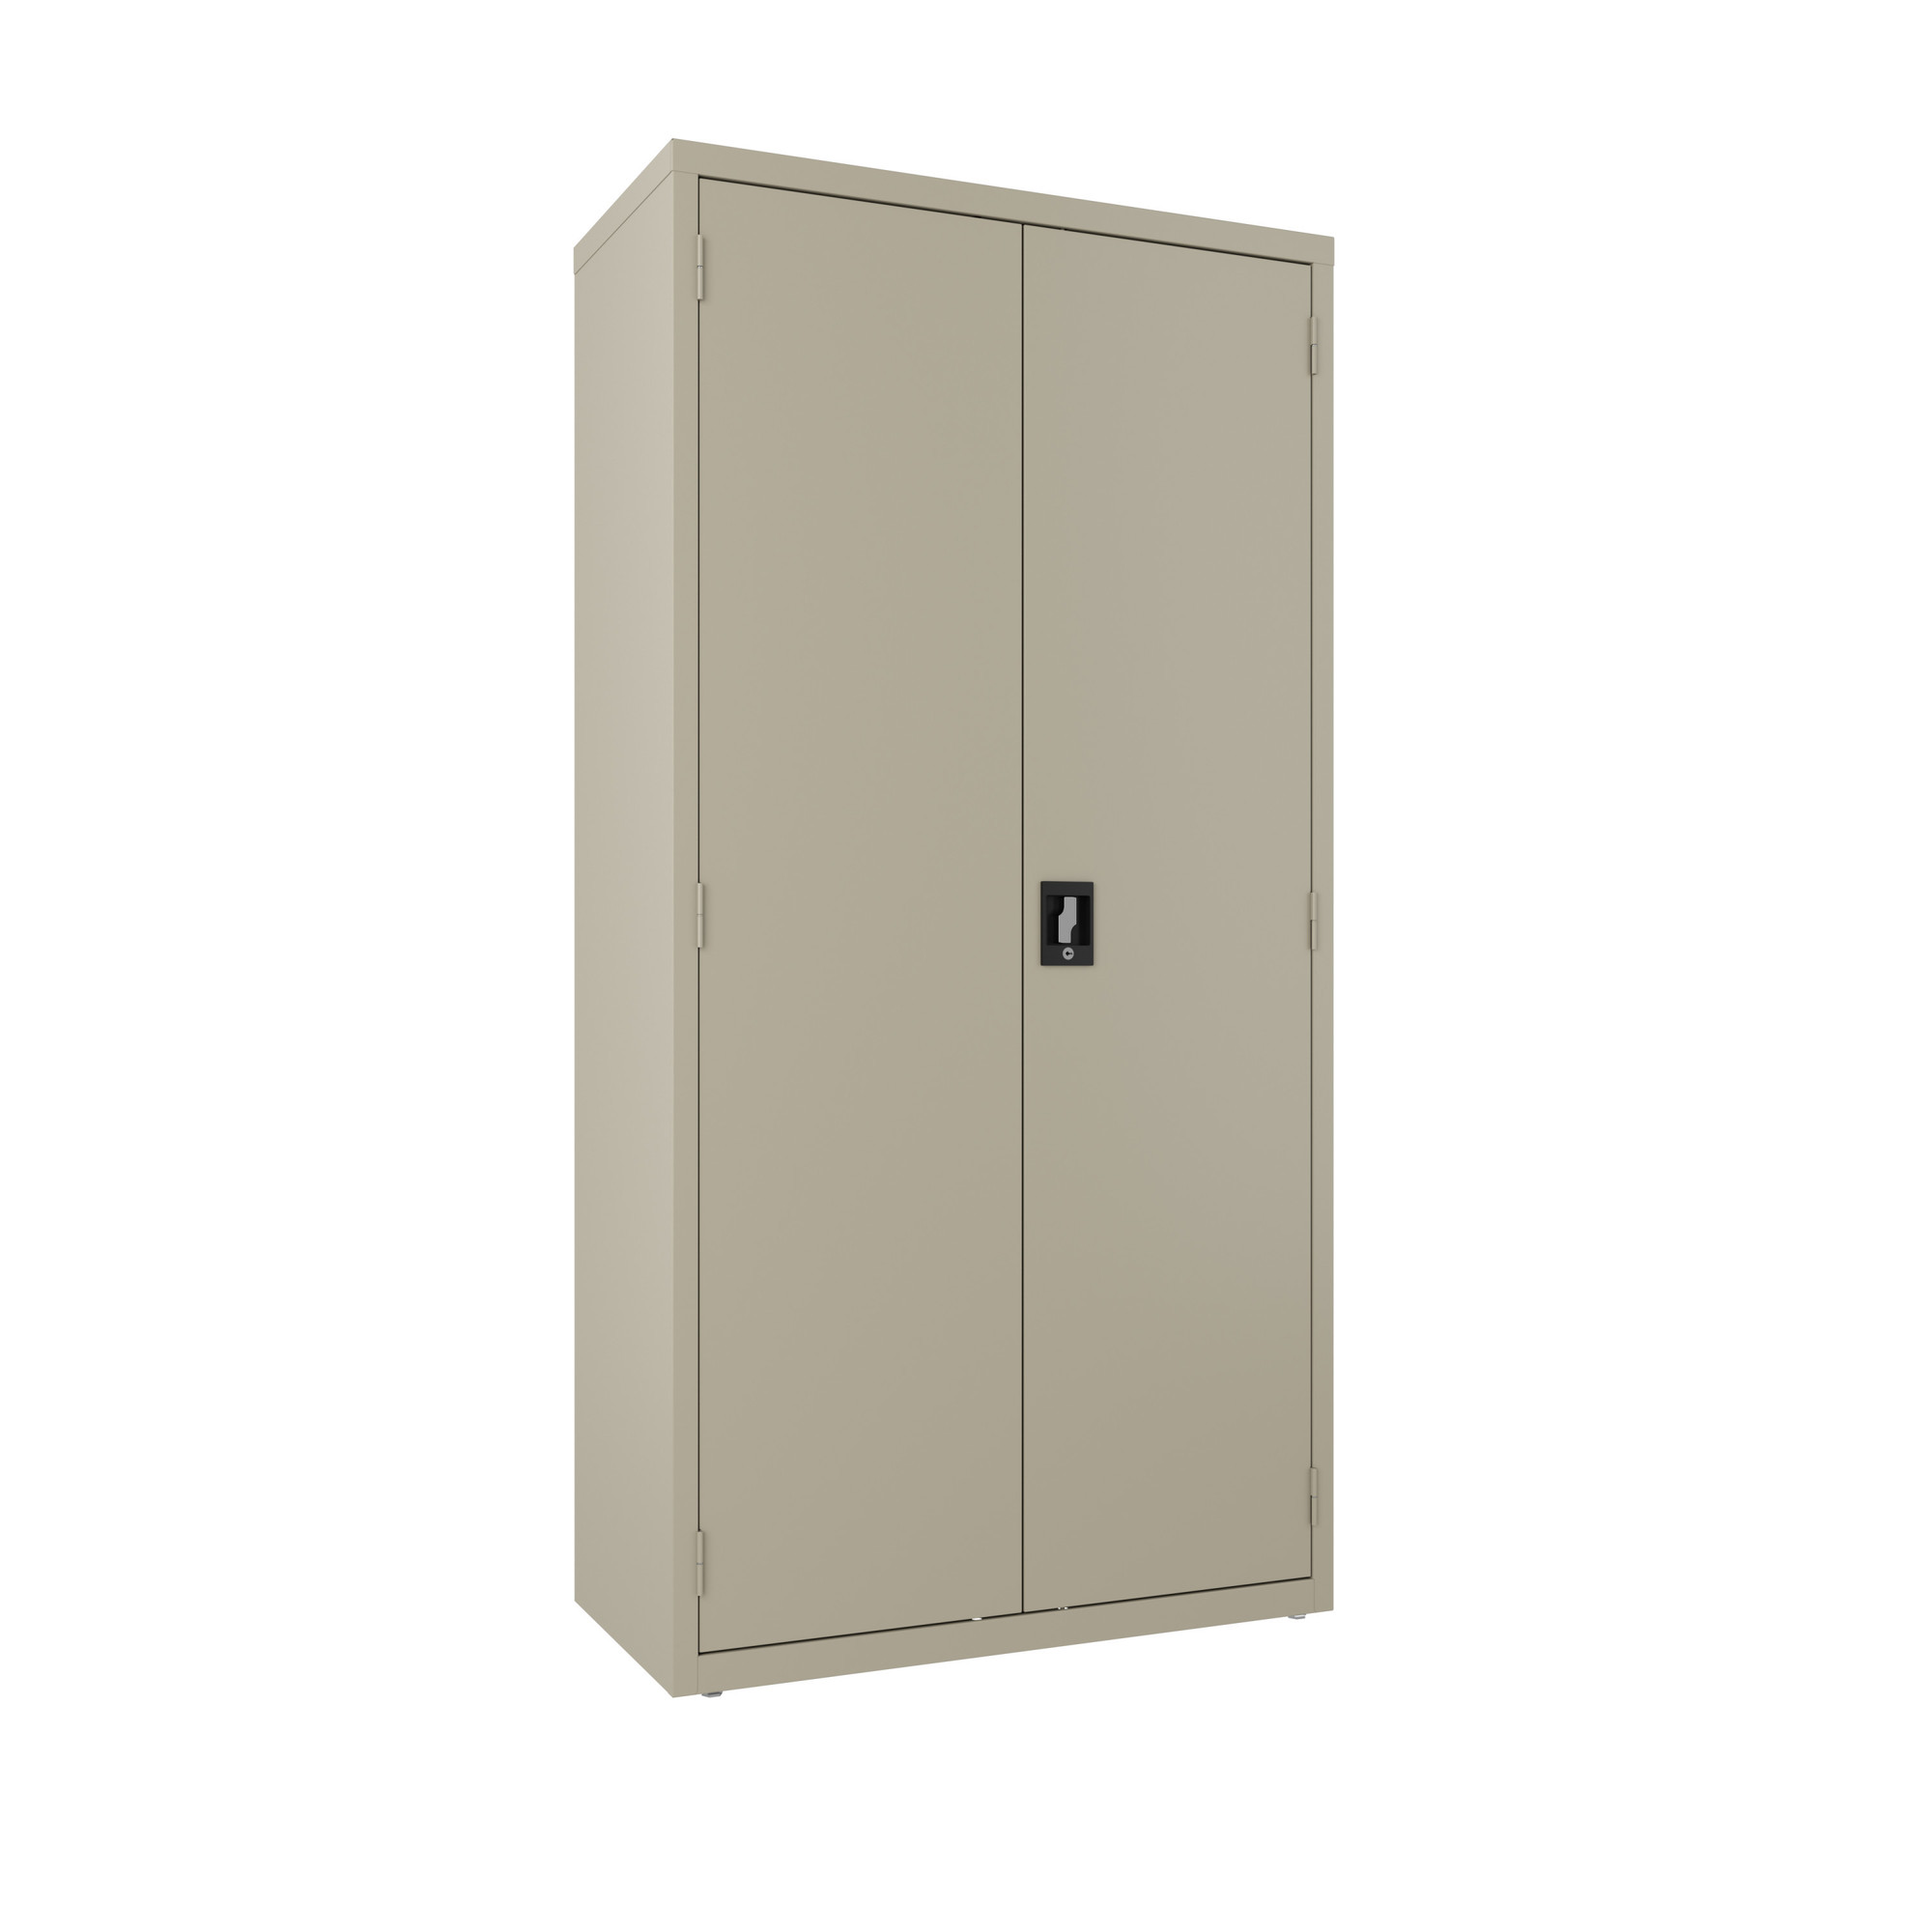 Hirsh Industries, Wardrobe Cabinet, Height 72 in, Width 36 in, Color Putty, Model 25062